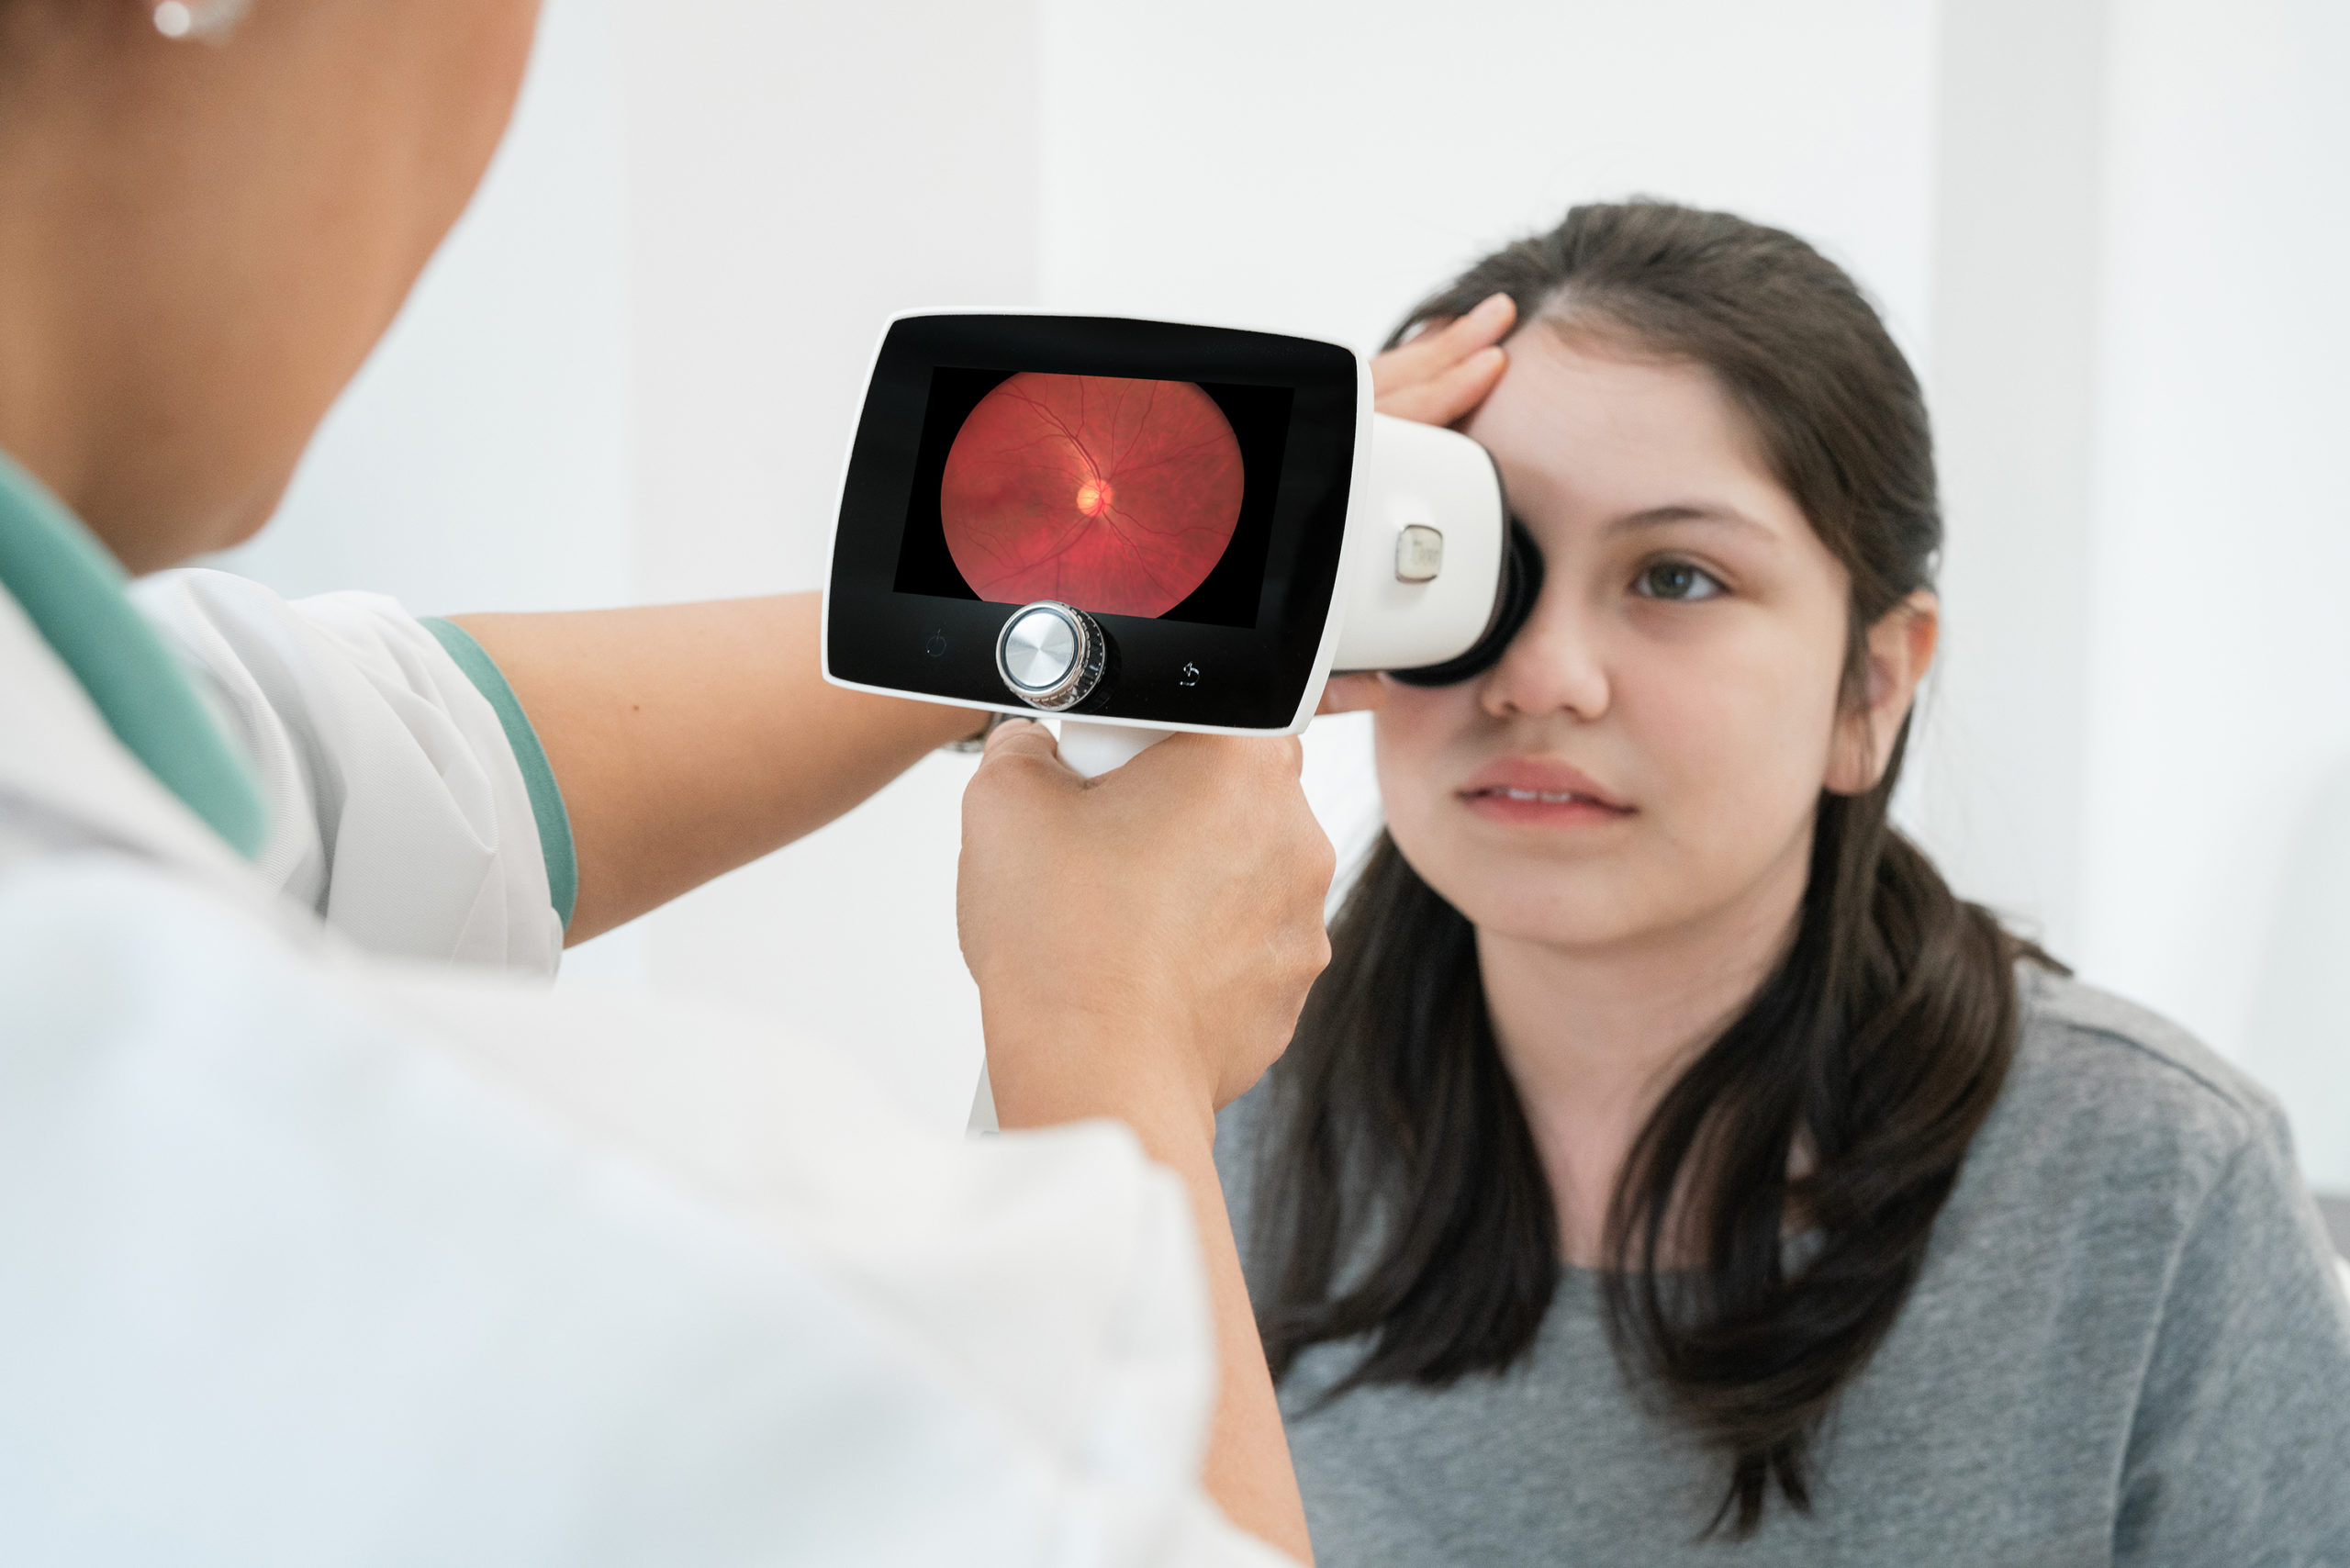 Ocular fundus imaging with a handheld fundus camera.